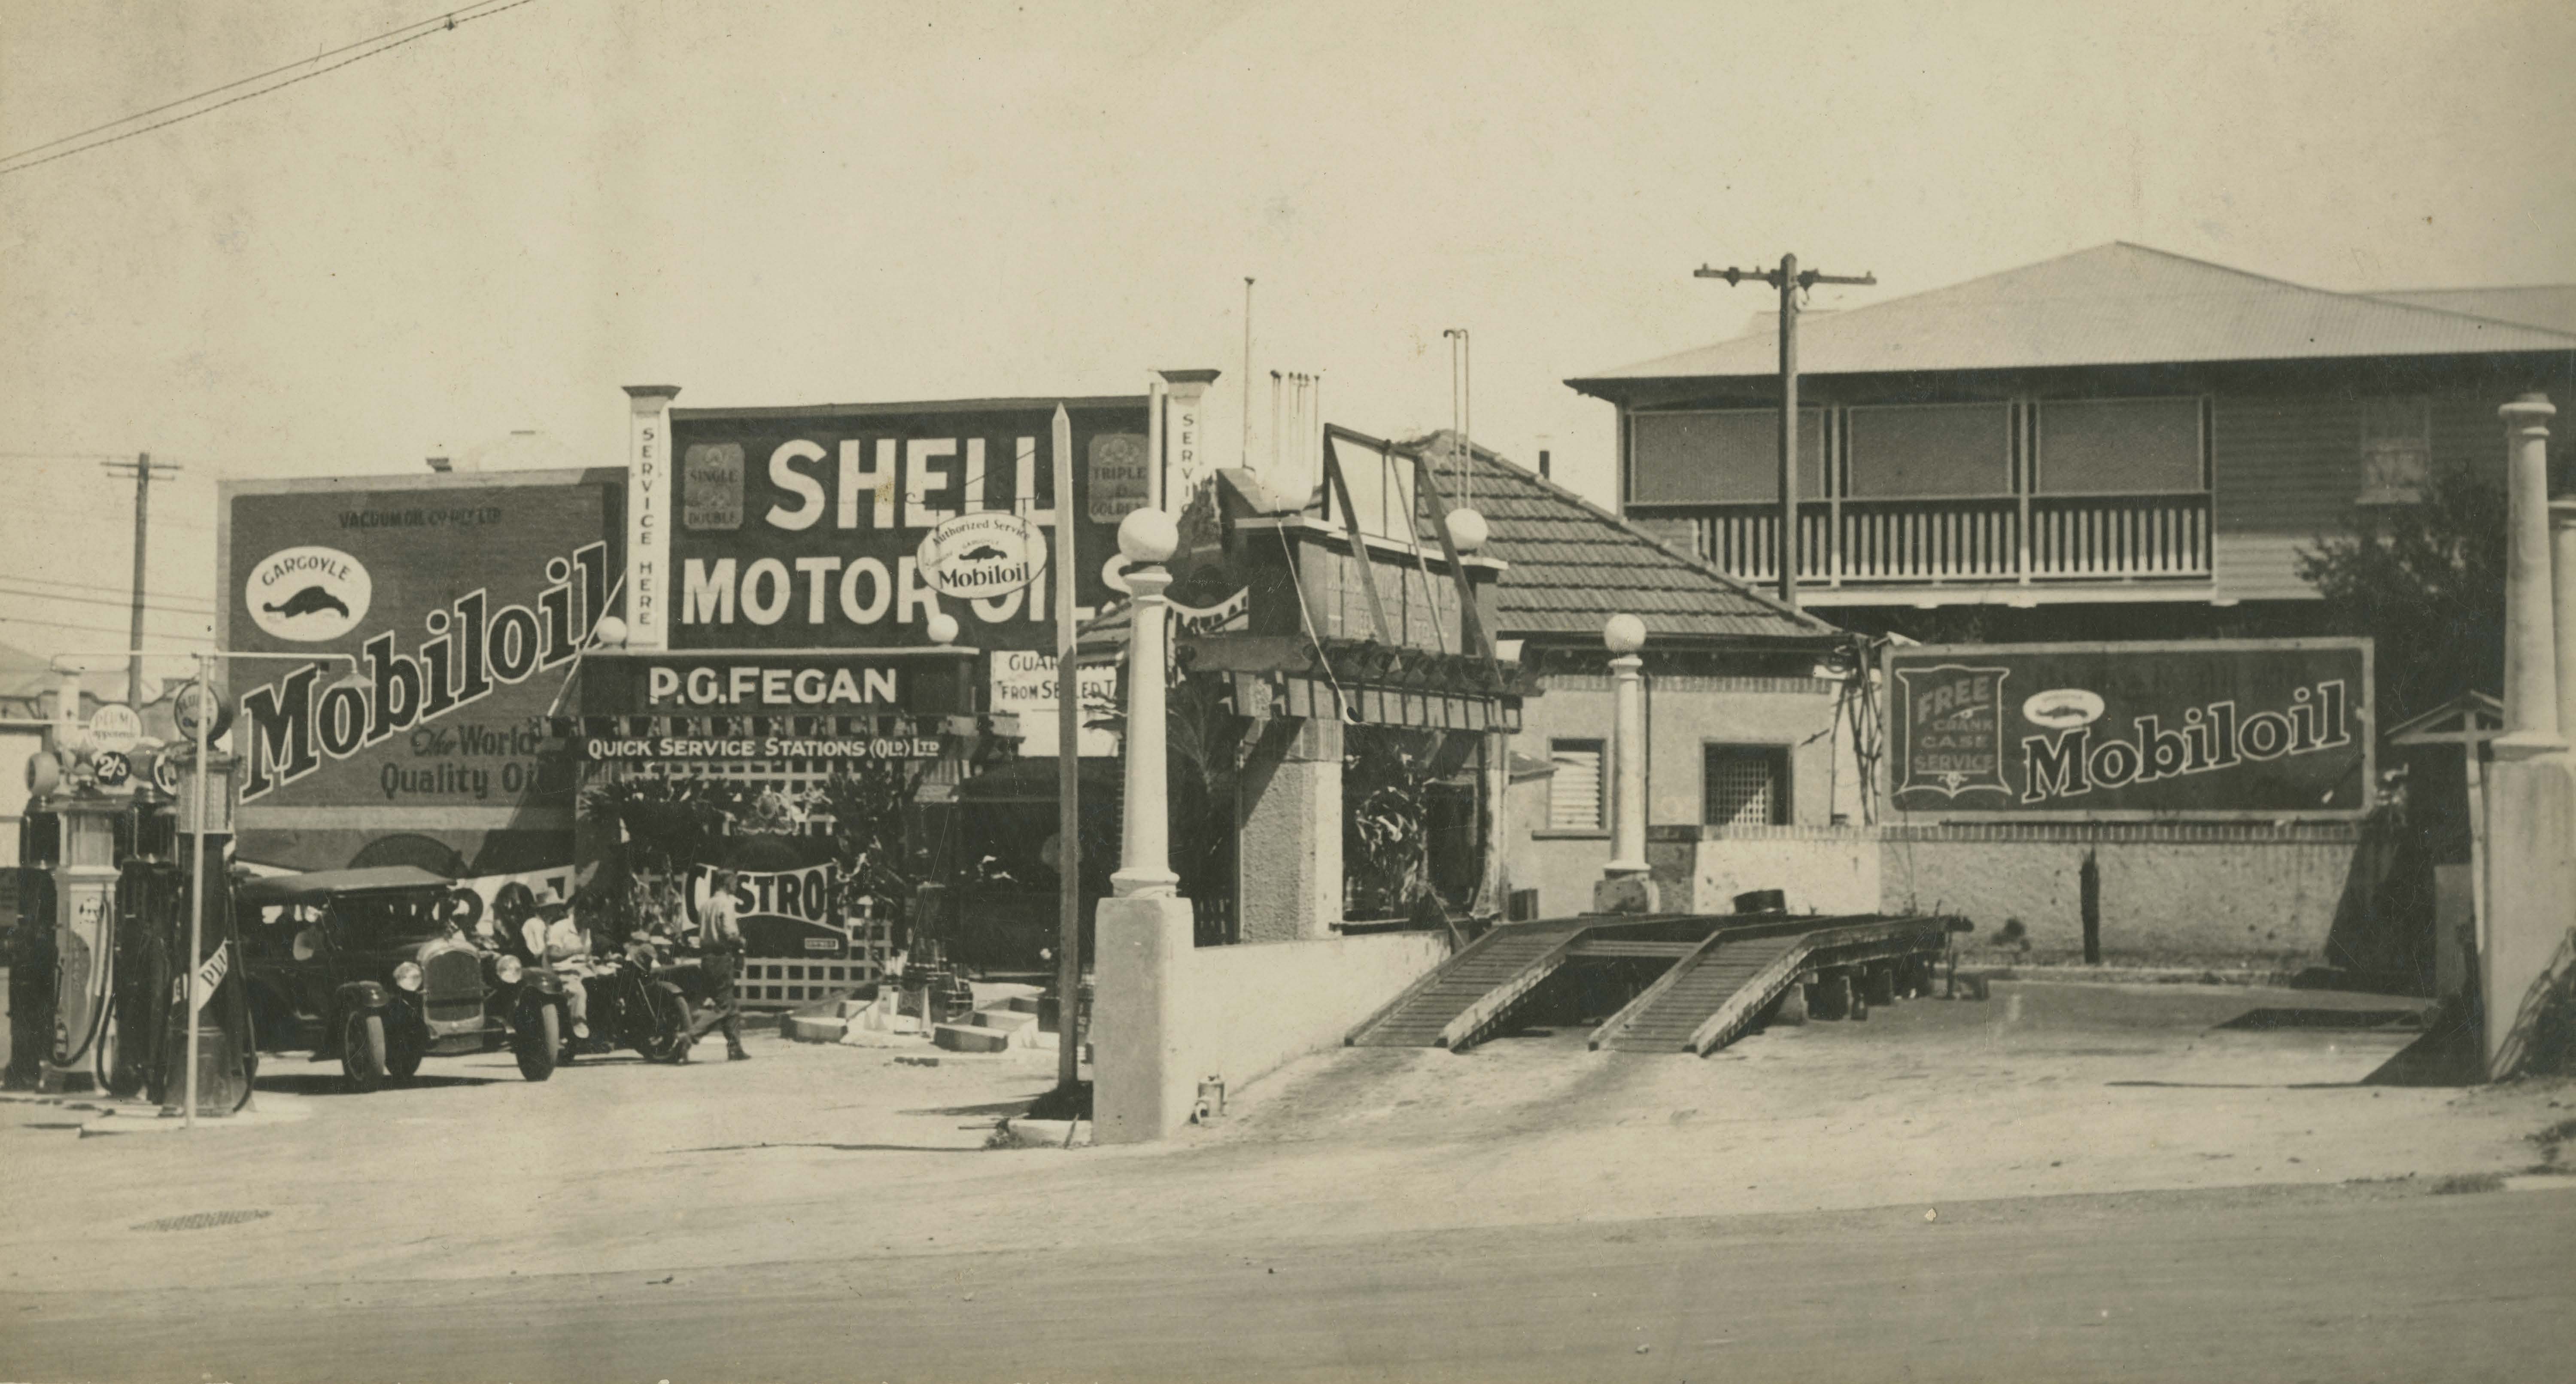 This is an image of ‘Pirie Grey Fegan's service station on Breakfast Creek Road in Newstead, Queensland, ca. 1935', viewed from the corner of Jordan Terrace & Breakfast Creek Road, Newstead, looking south.